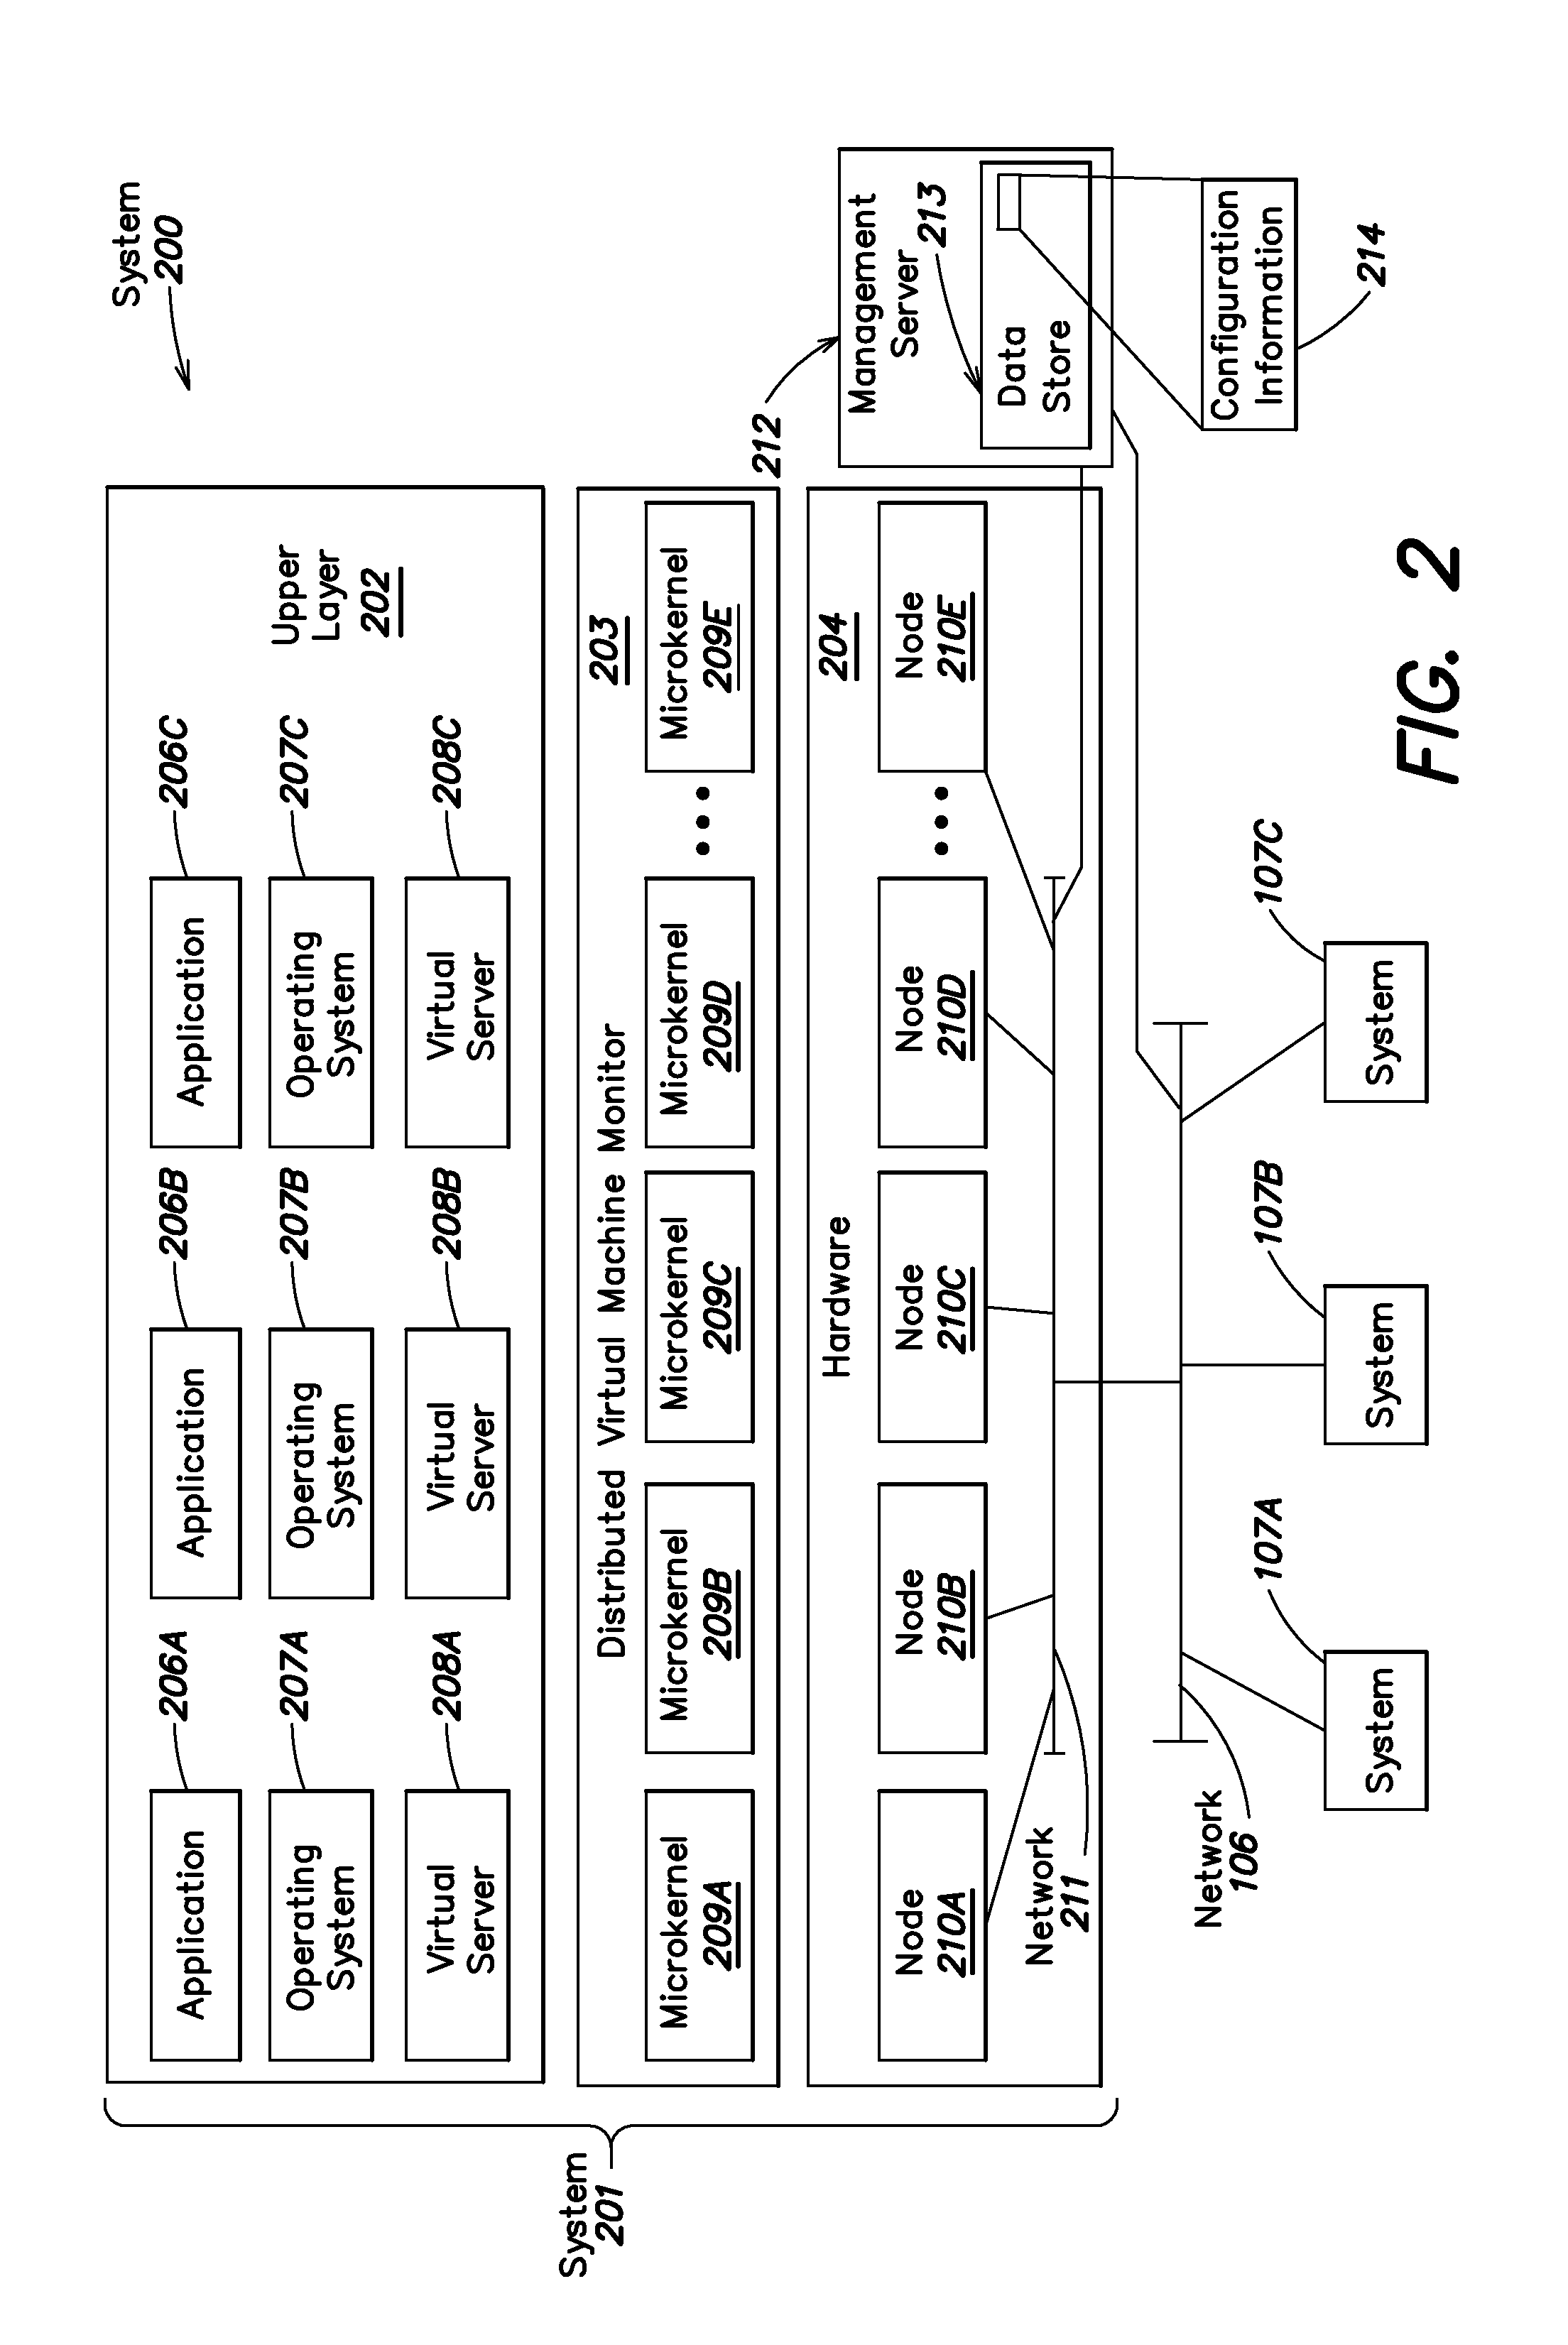 Distributed virtual machine monitor for managing multiple virtual resources across multiple physical nodes